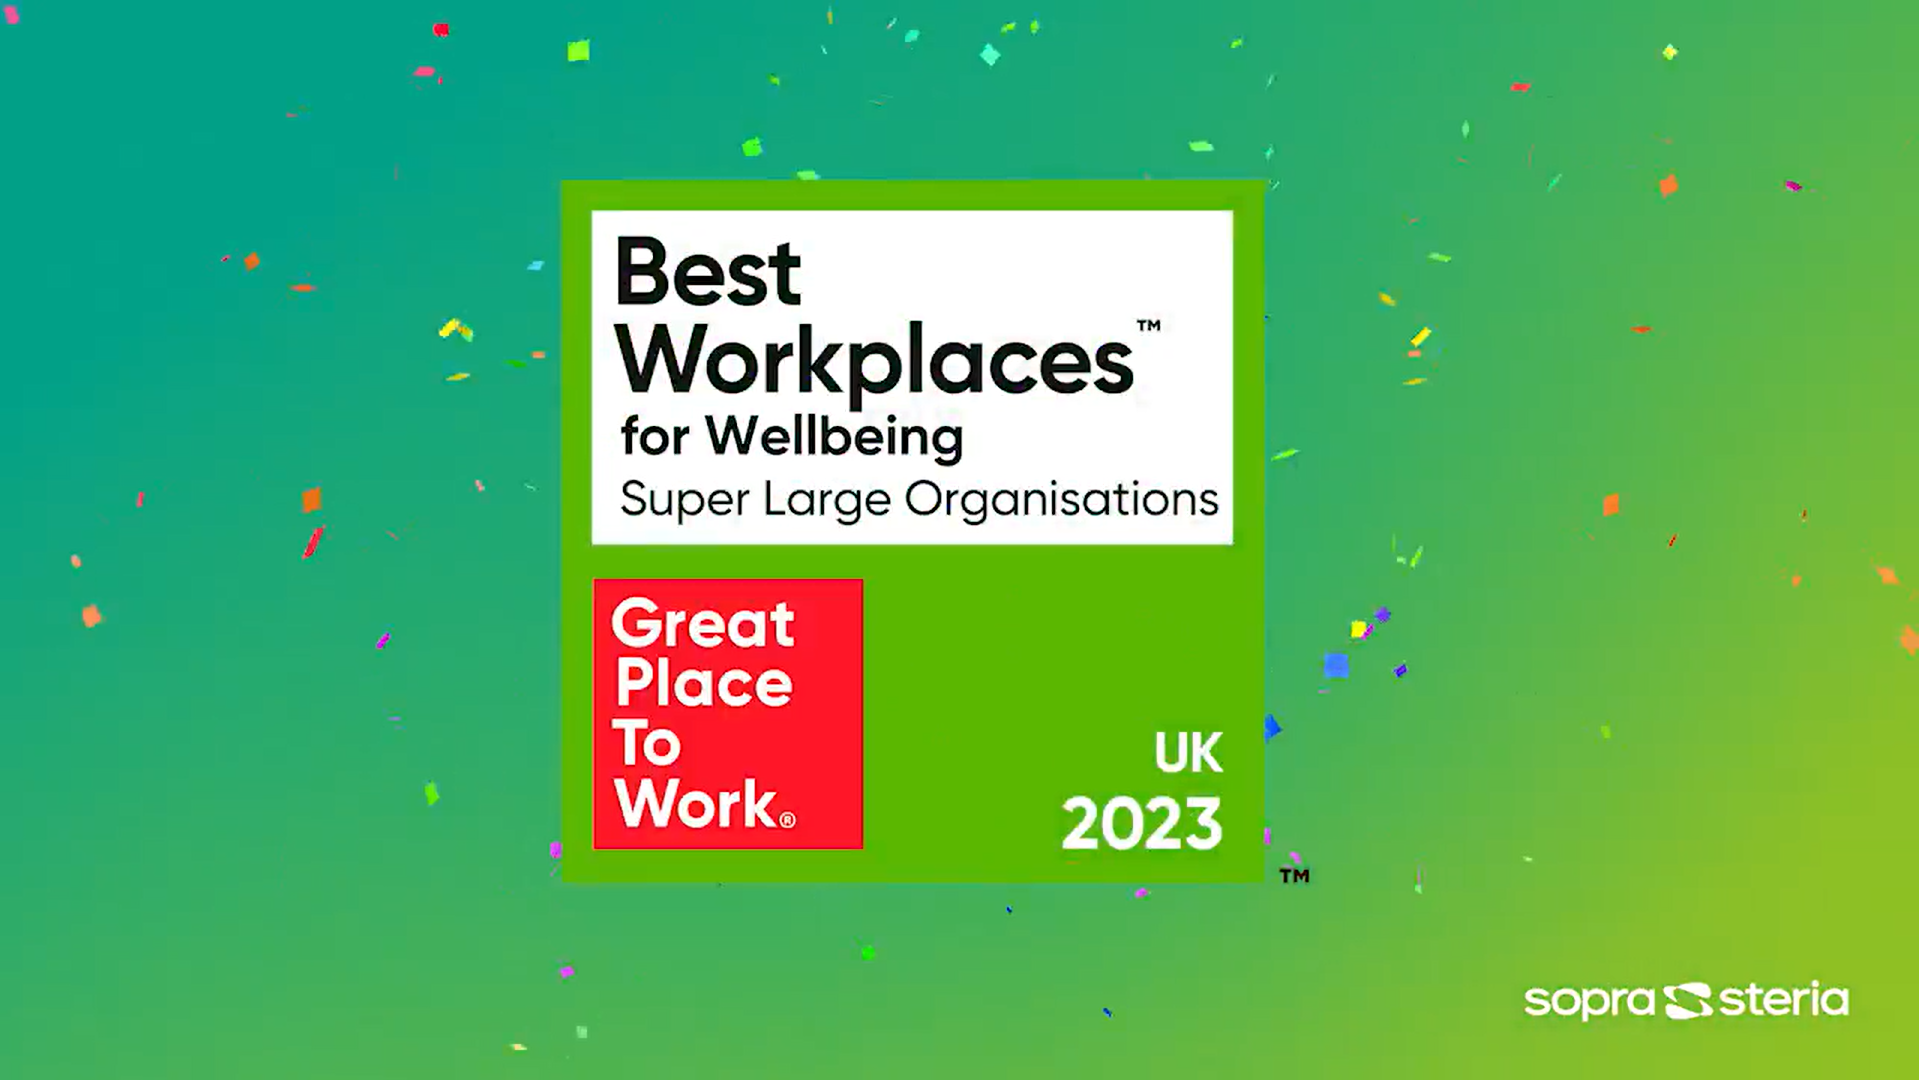 Best Workplaces for Wellbeing logo against a green gradient background